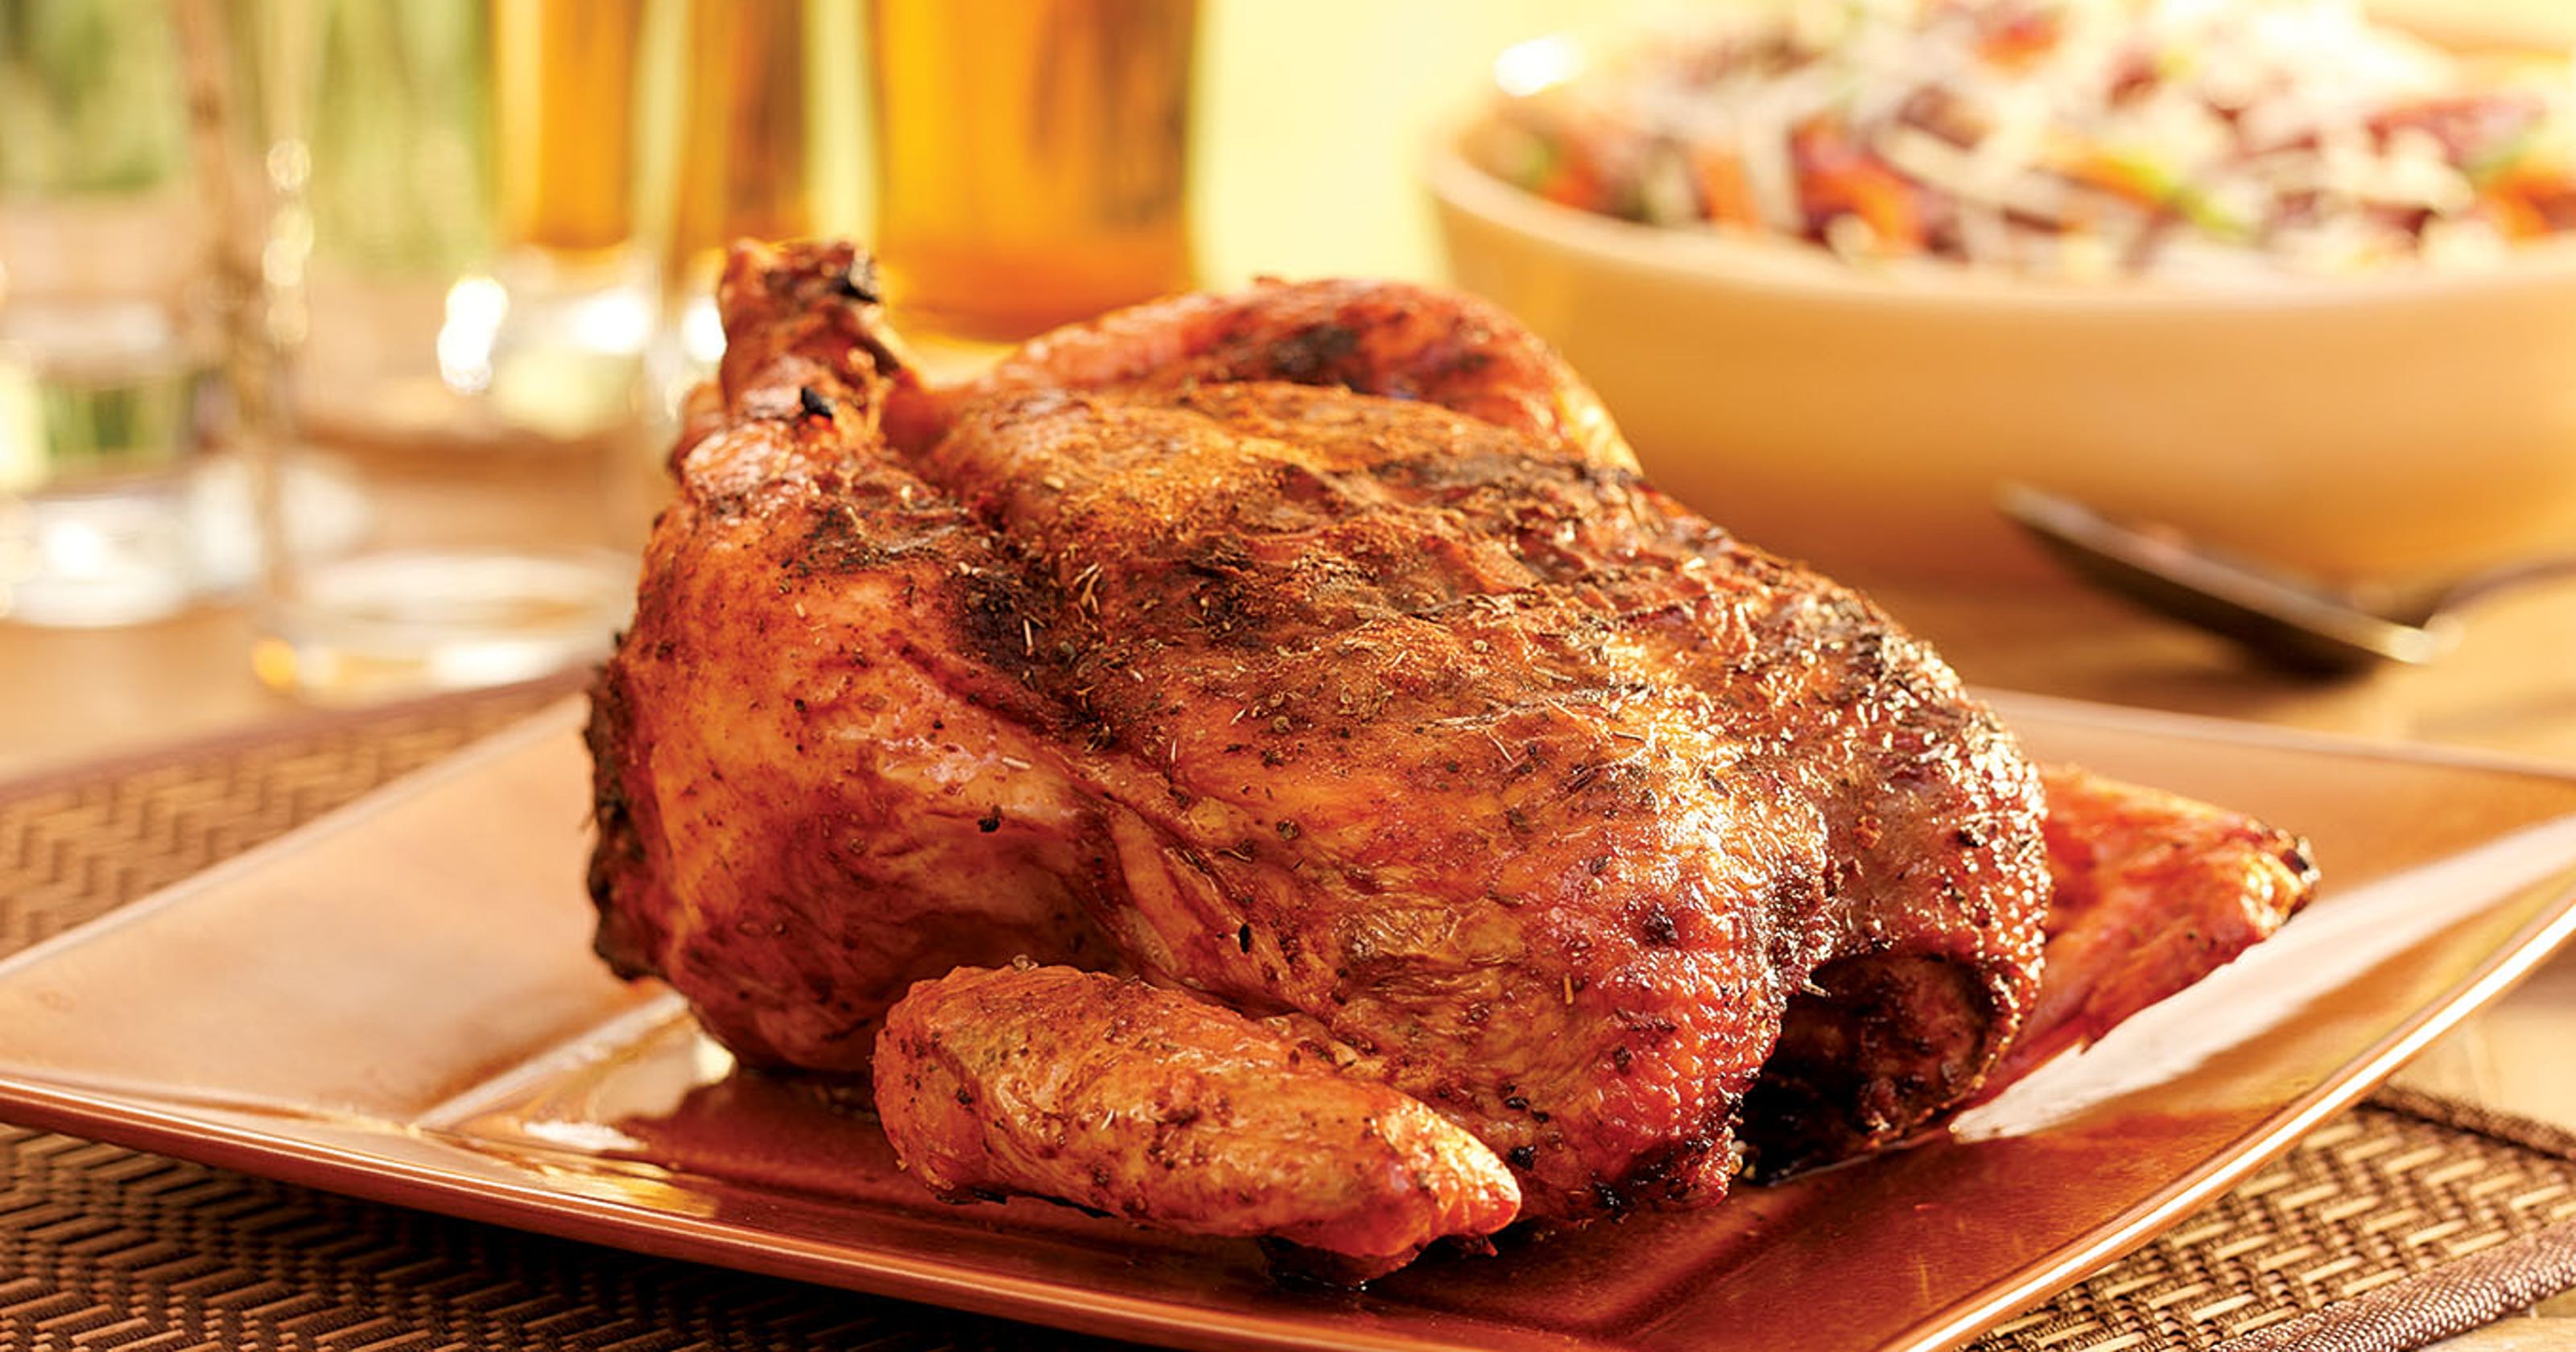 Beer-roasted chicken high in flavor, low in fat